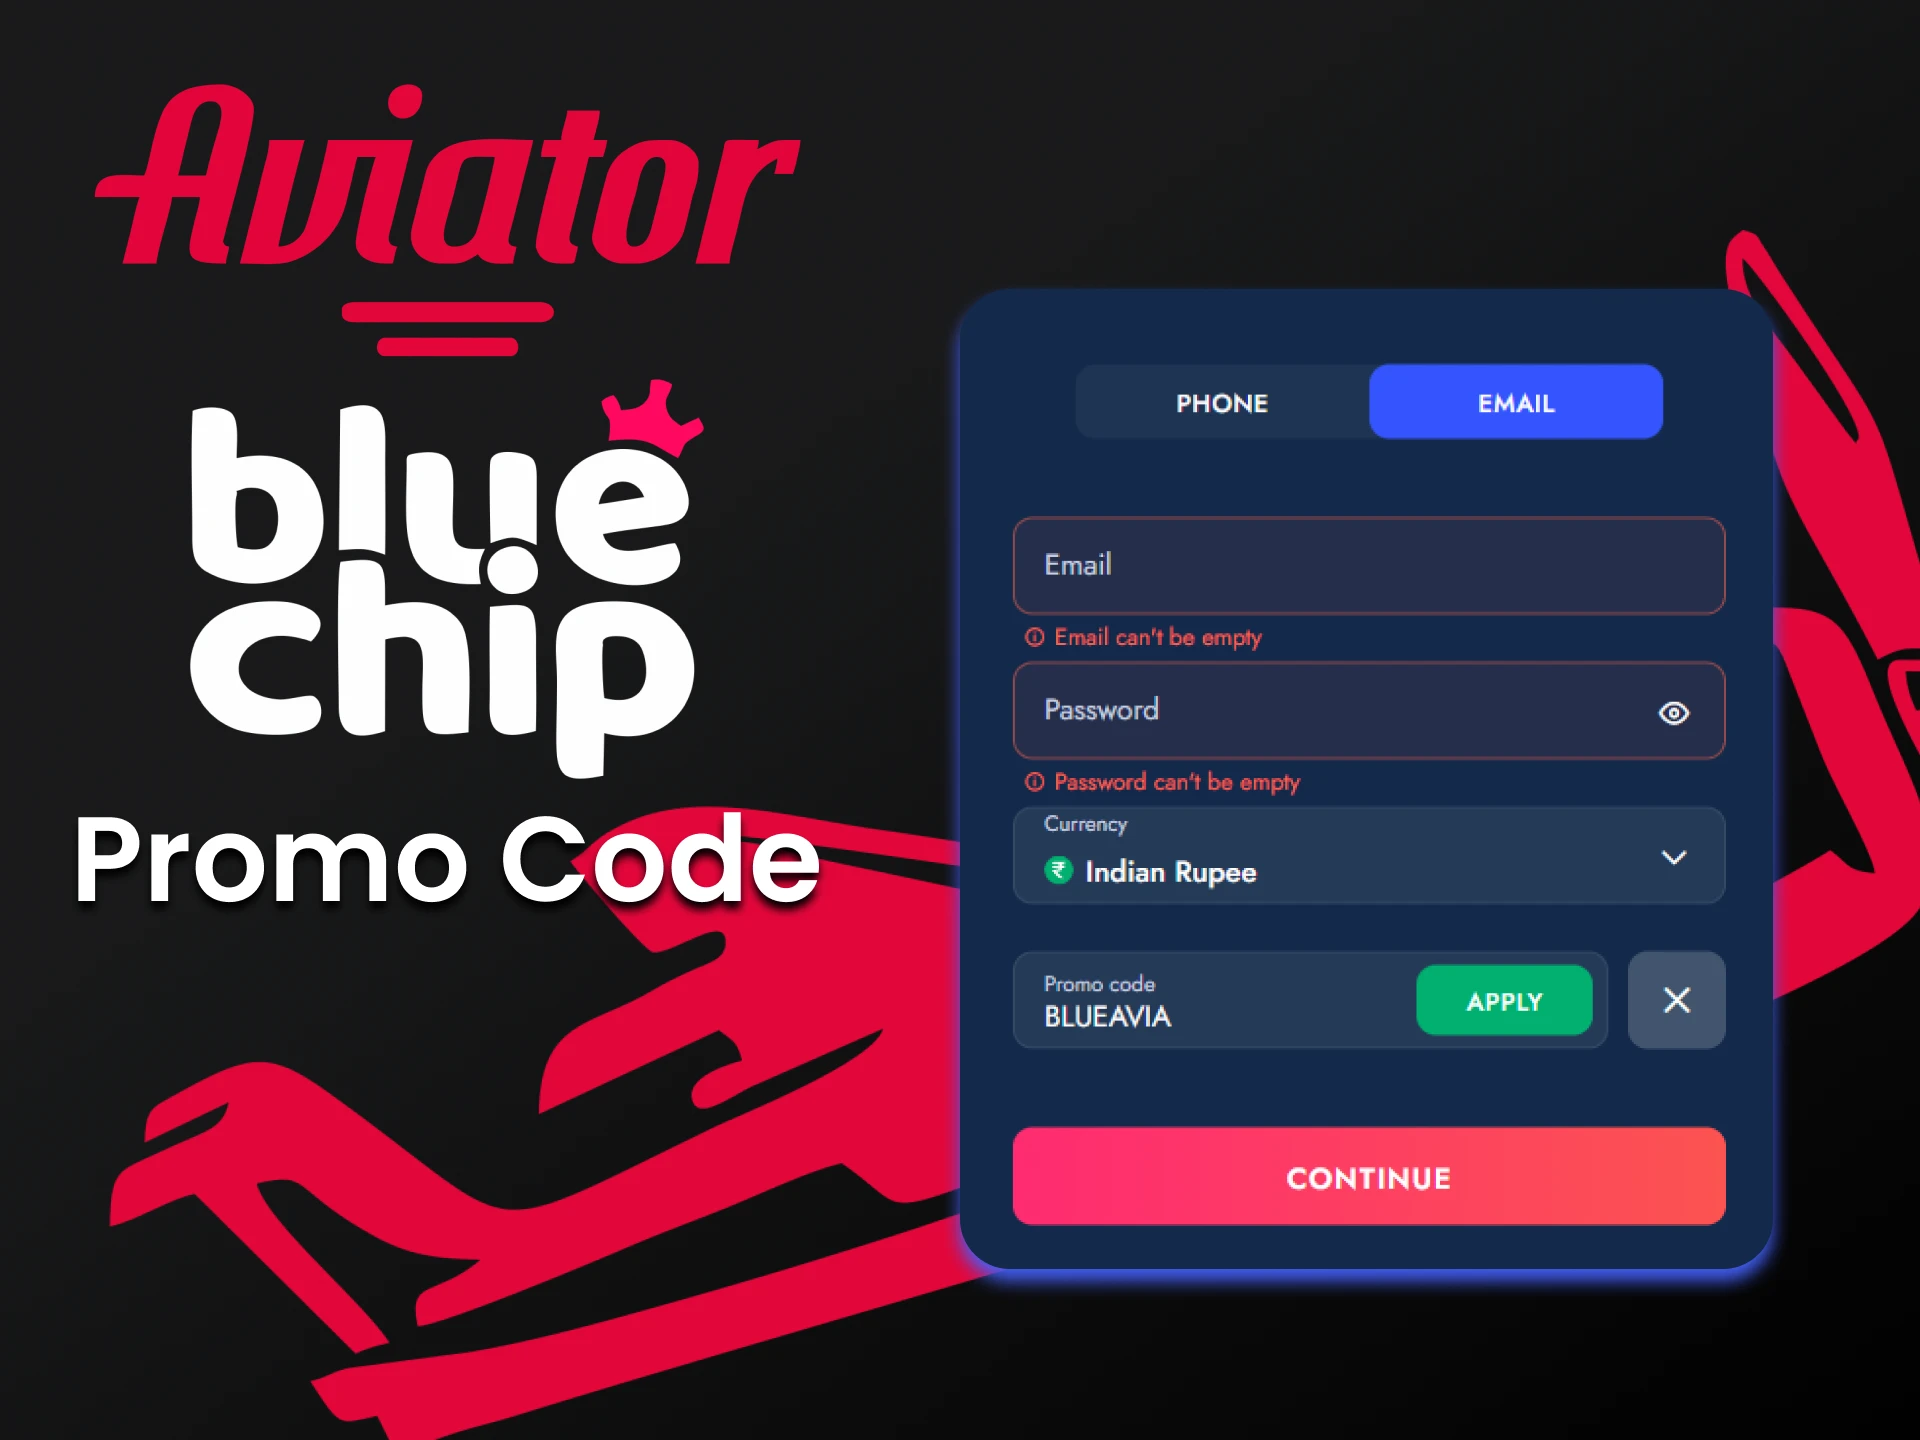 Enter the code and get a bonus from Bluechip.